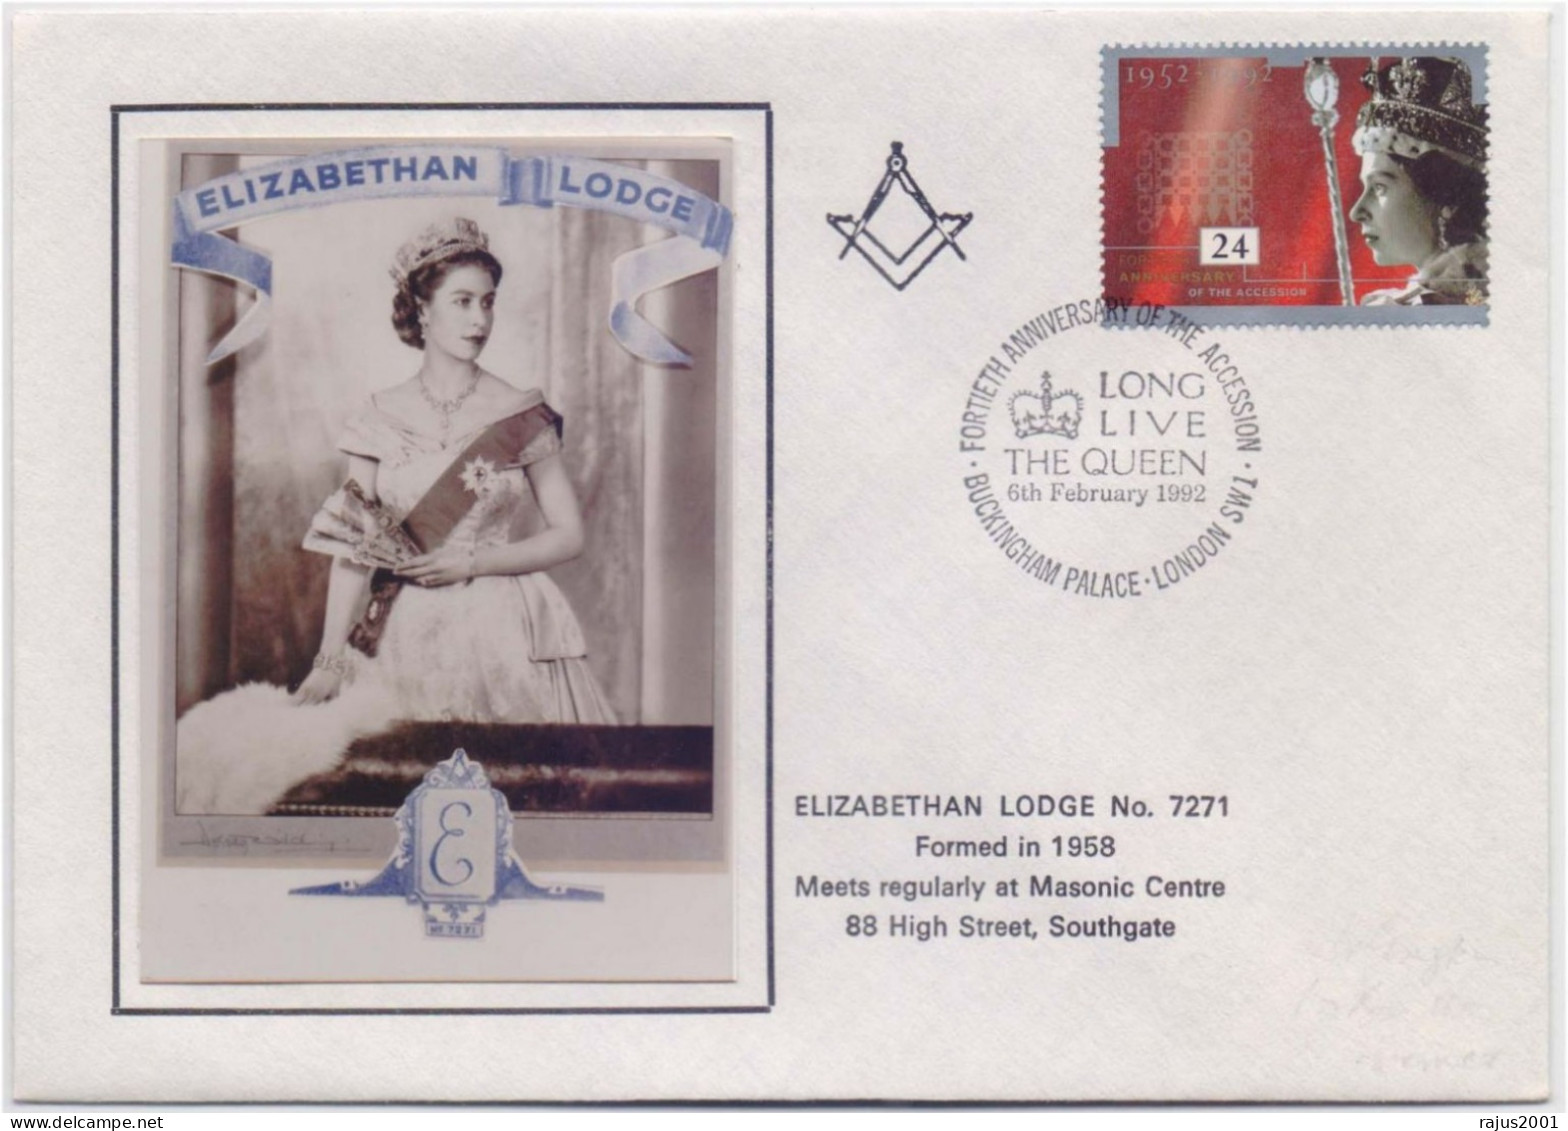 ELIZABETHAN LODGE NO 7271 FORMED IN 1958, Queen Elizabeth, Freemasonry, Masonic Limited Only 100 Cover Issued Cover - Massoneria